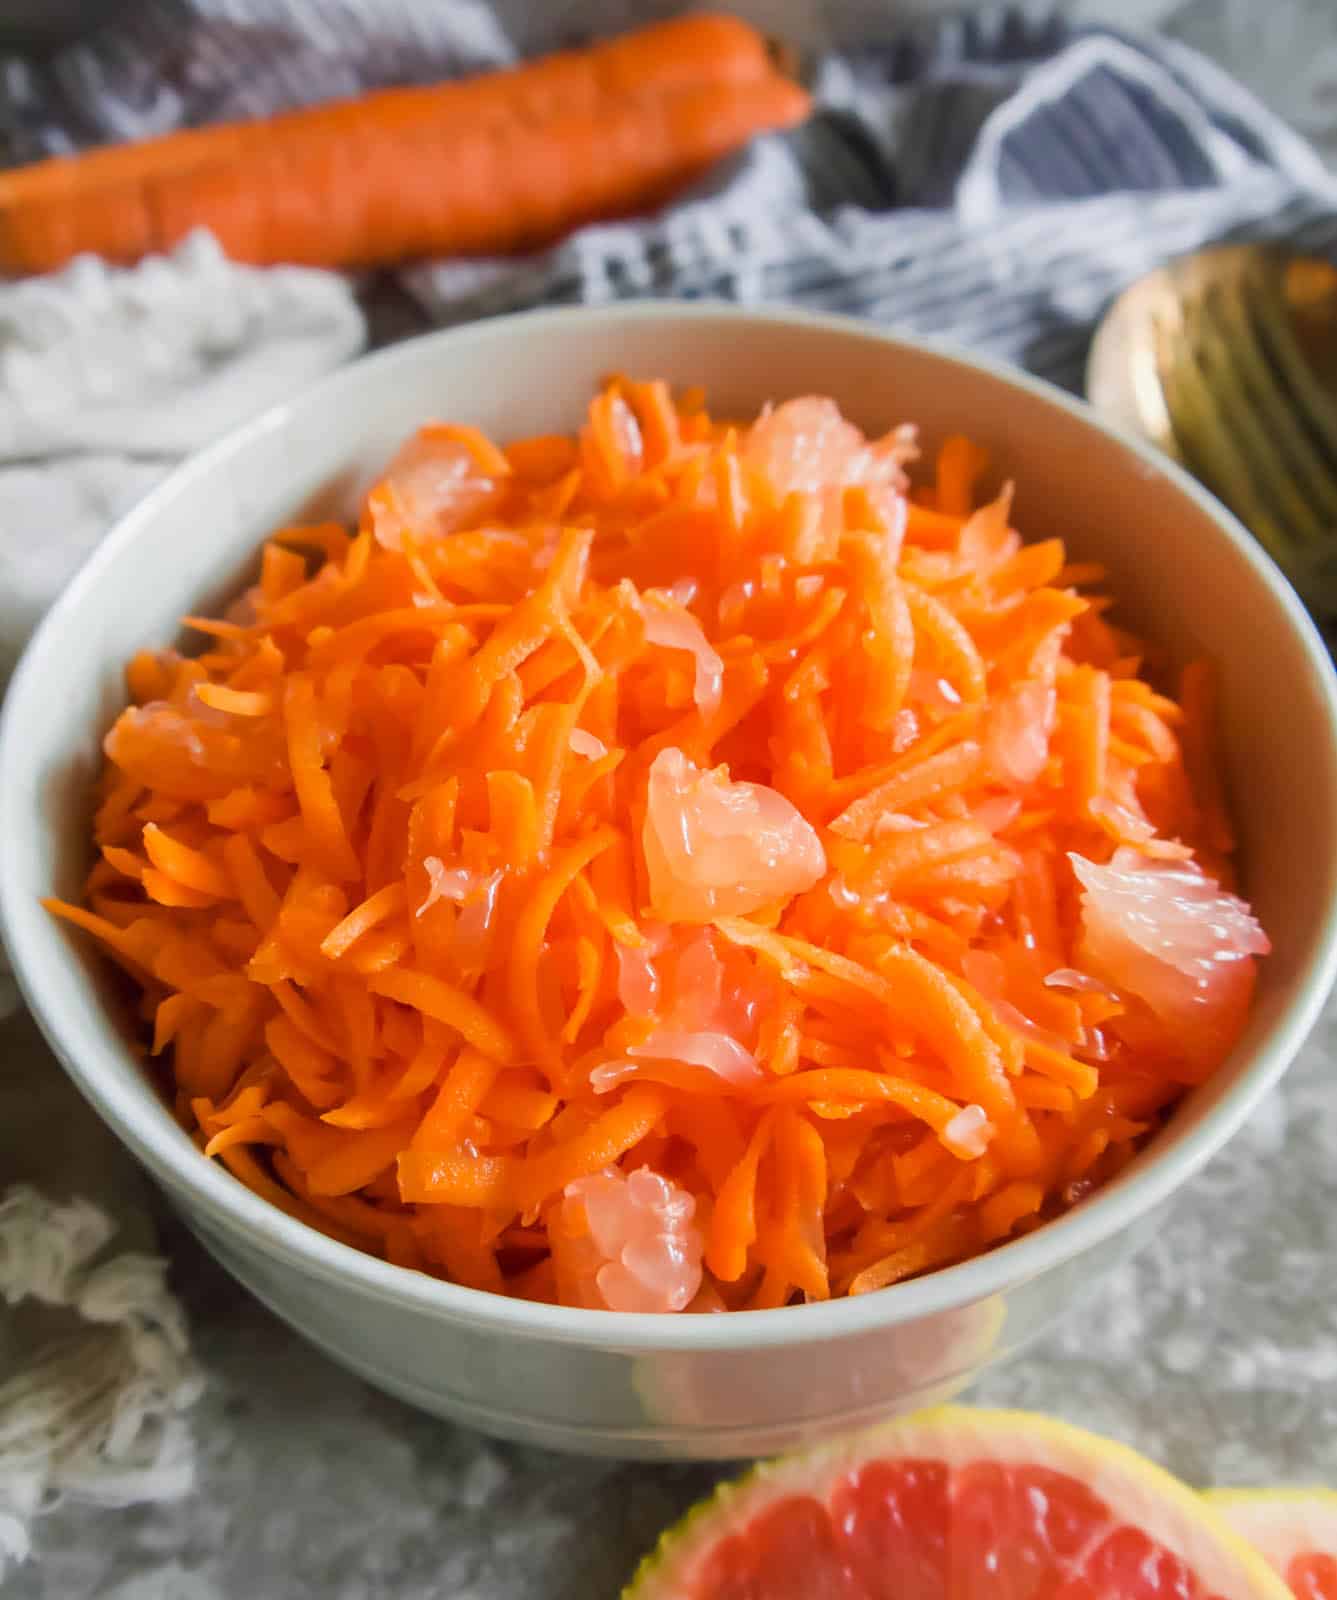 Raw carrot salad with grapefruit in a bowl on a plate.